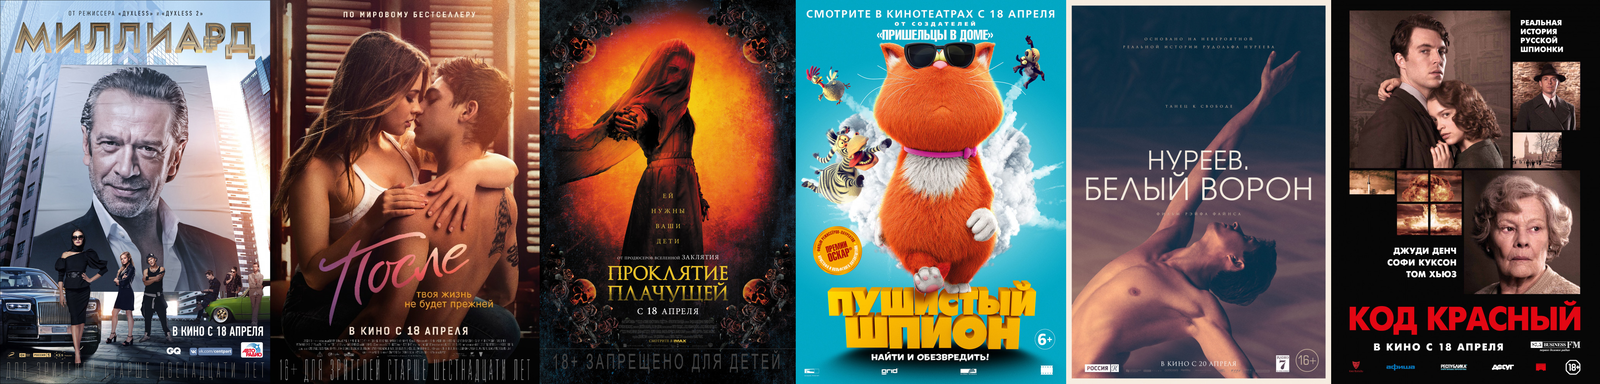 Russian box office receipts and distribution of screenings over the past weekend (April 18 - 21) - Movies, Box office fees, Film distribution, After, , Rudolf Nureyev, Code red